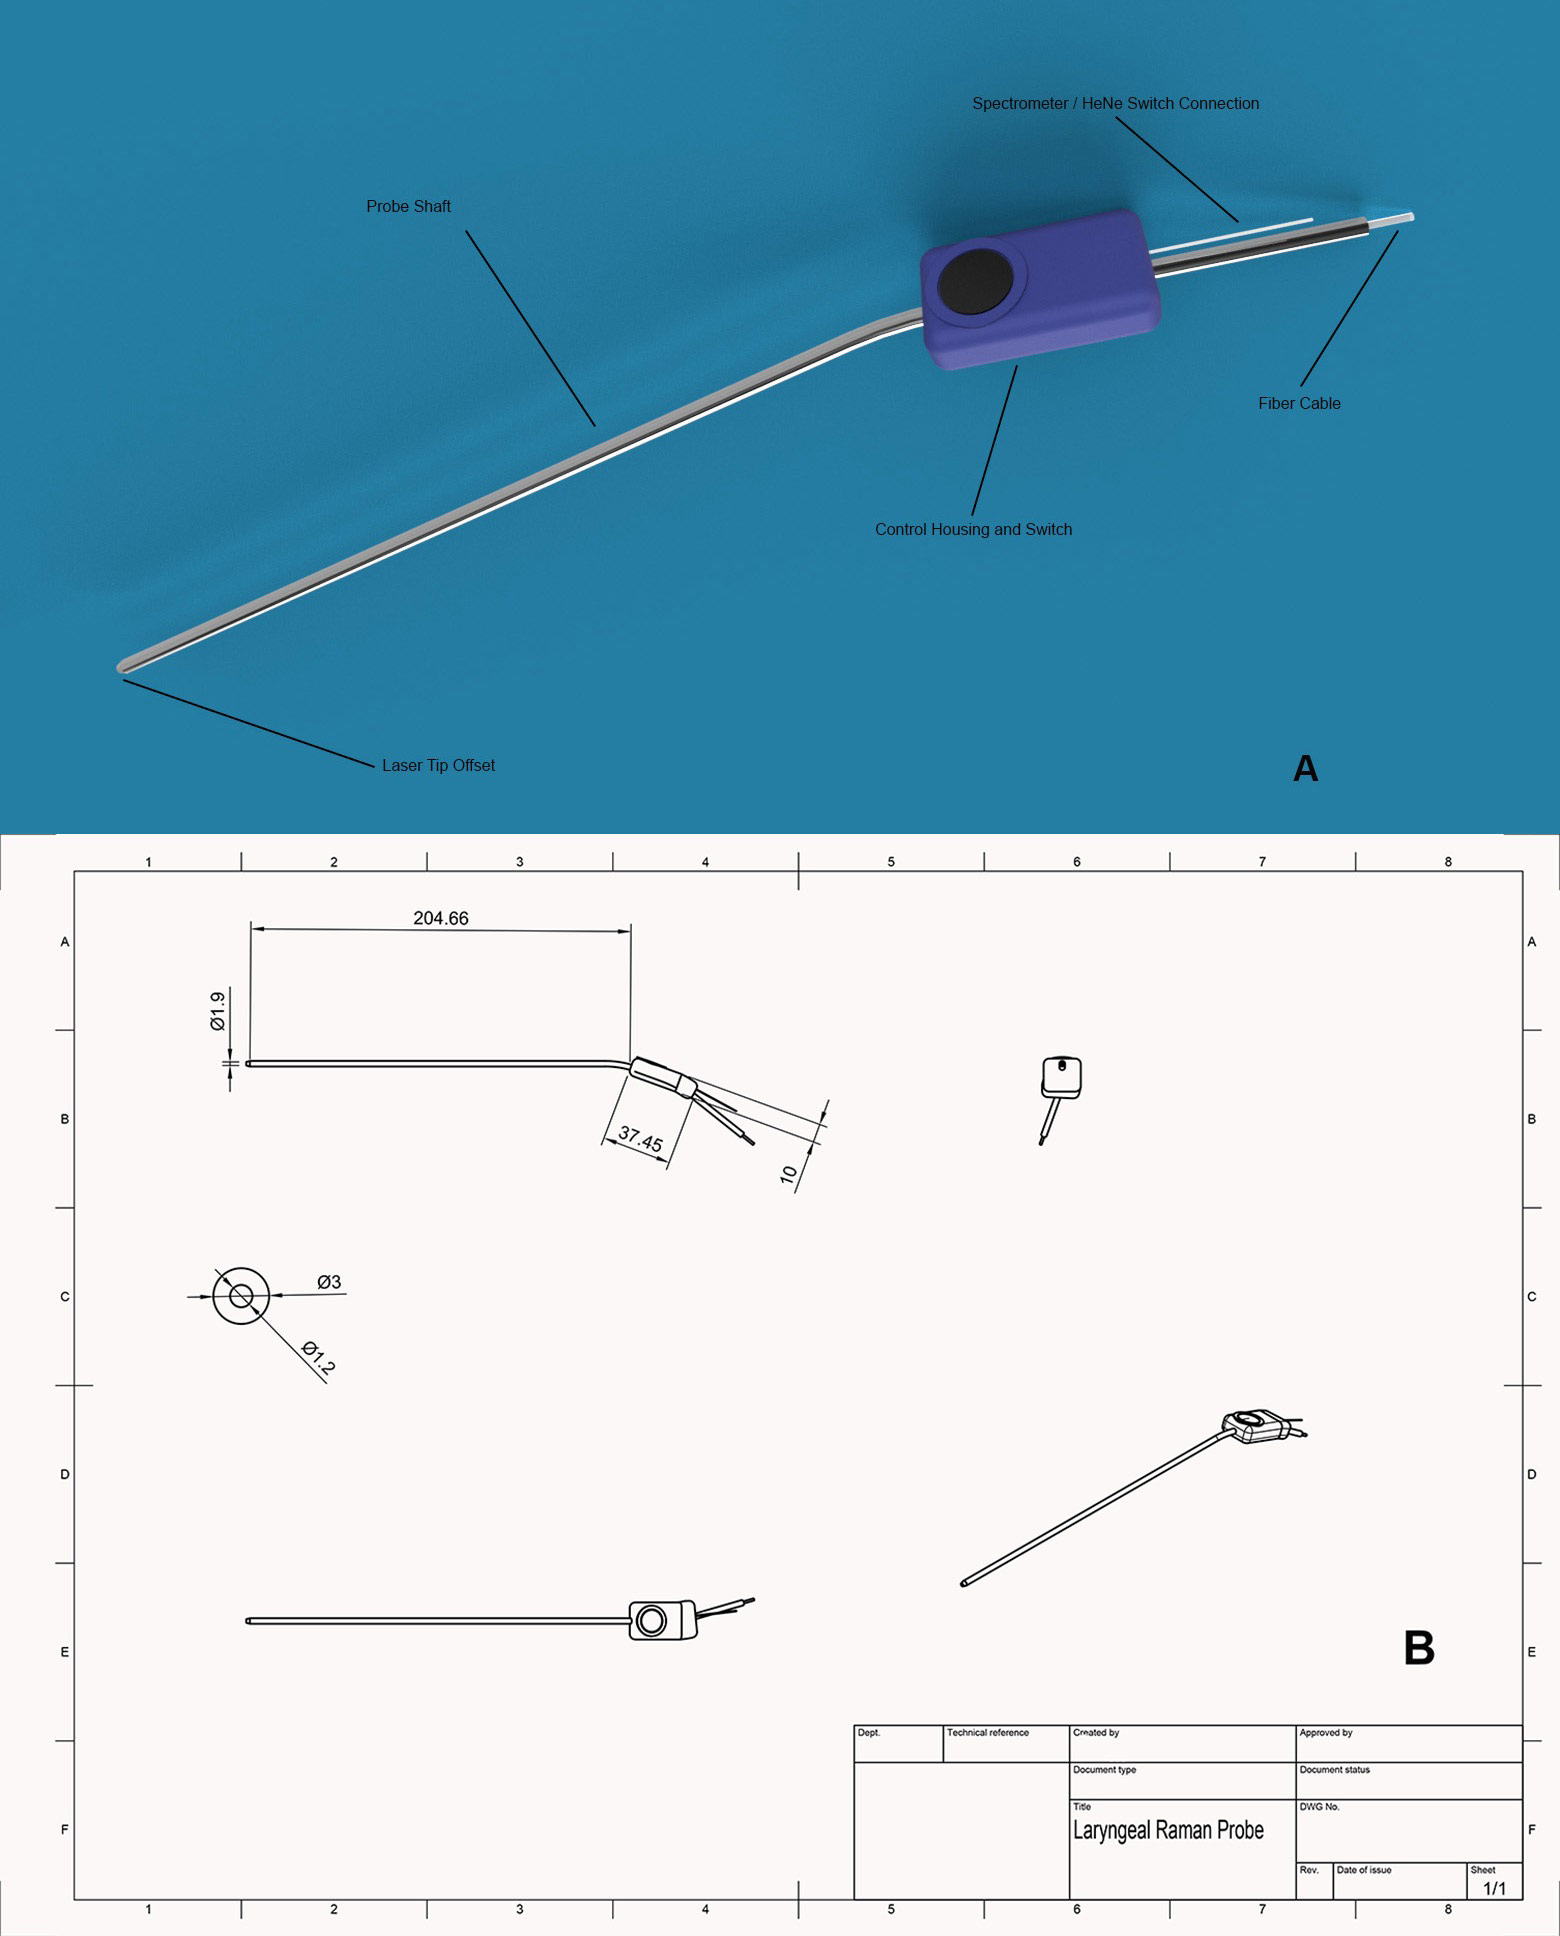 Laryngeal Surgical Raman Probe and Specs